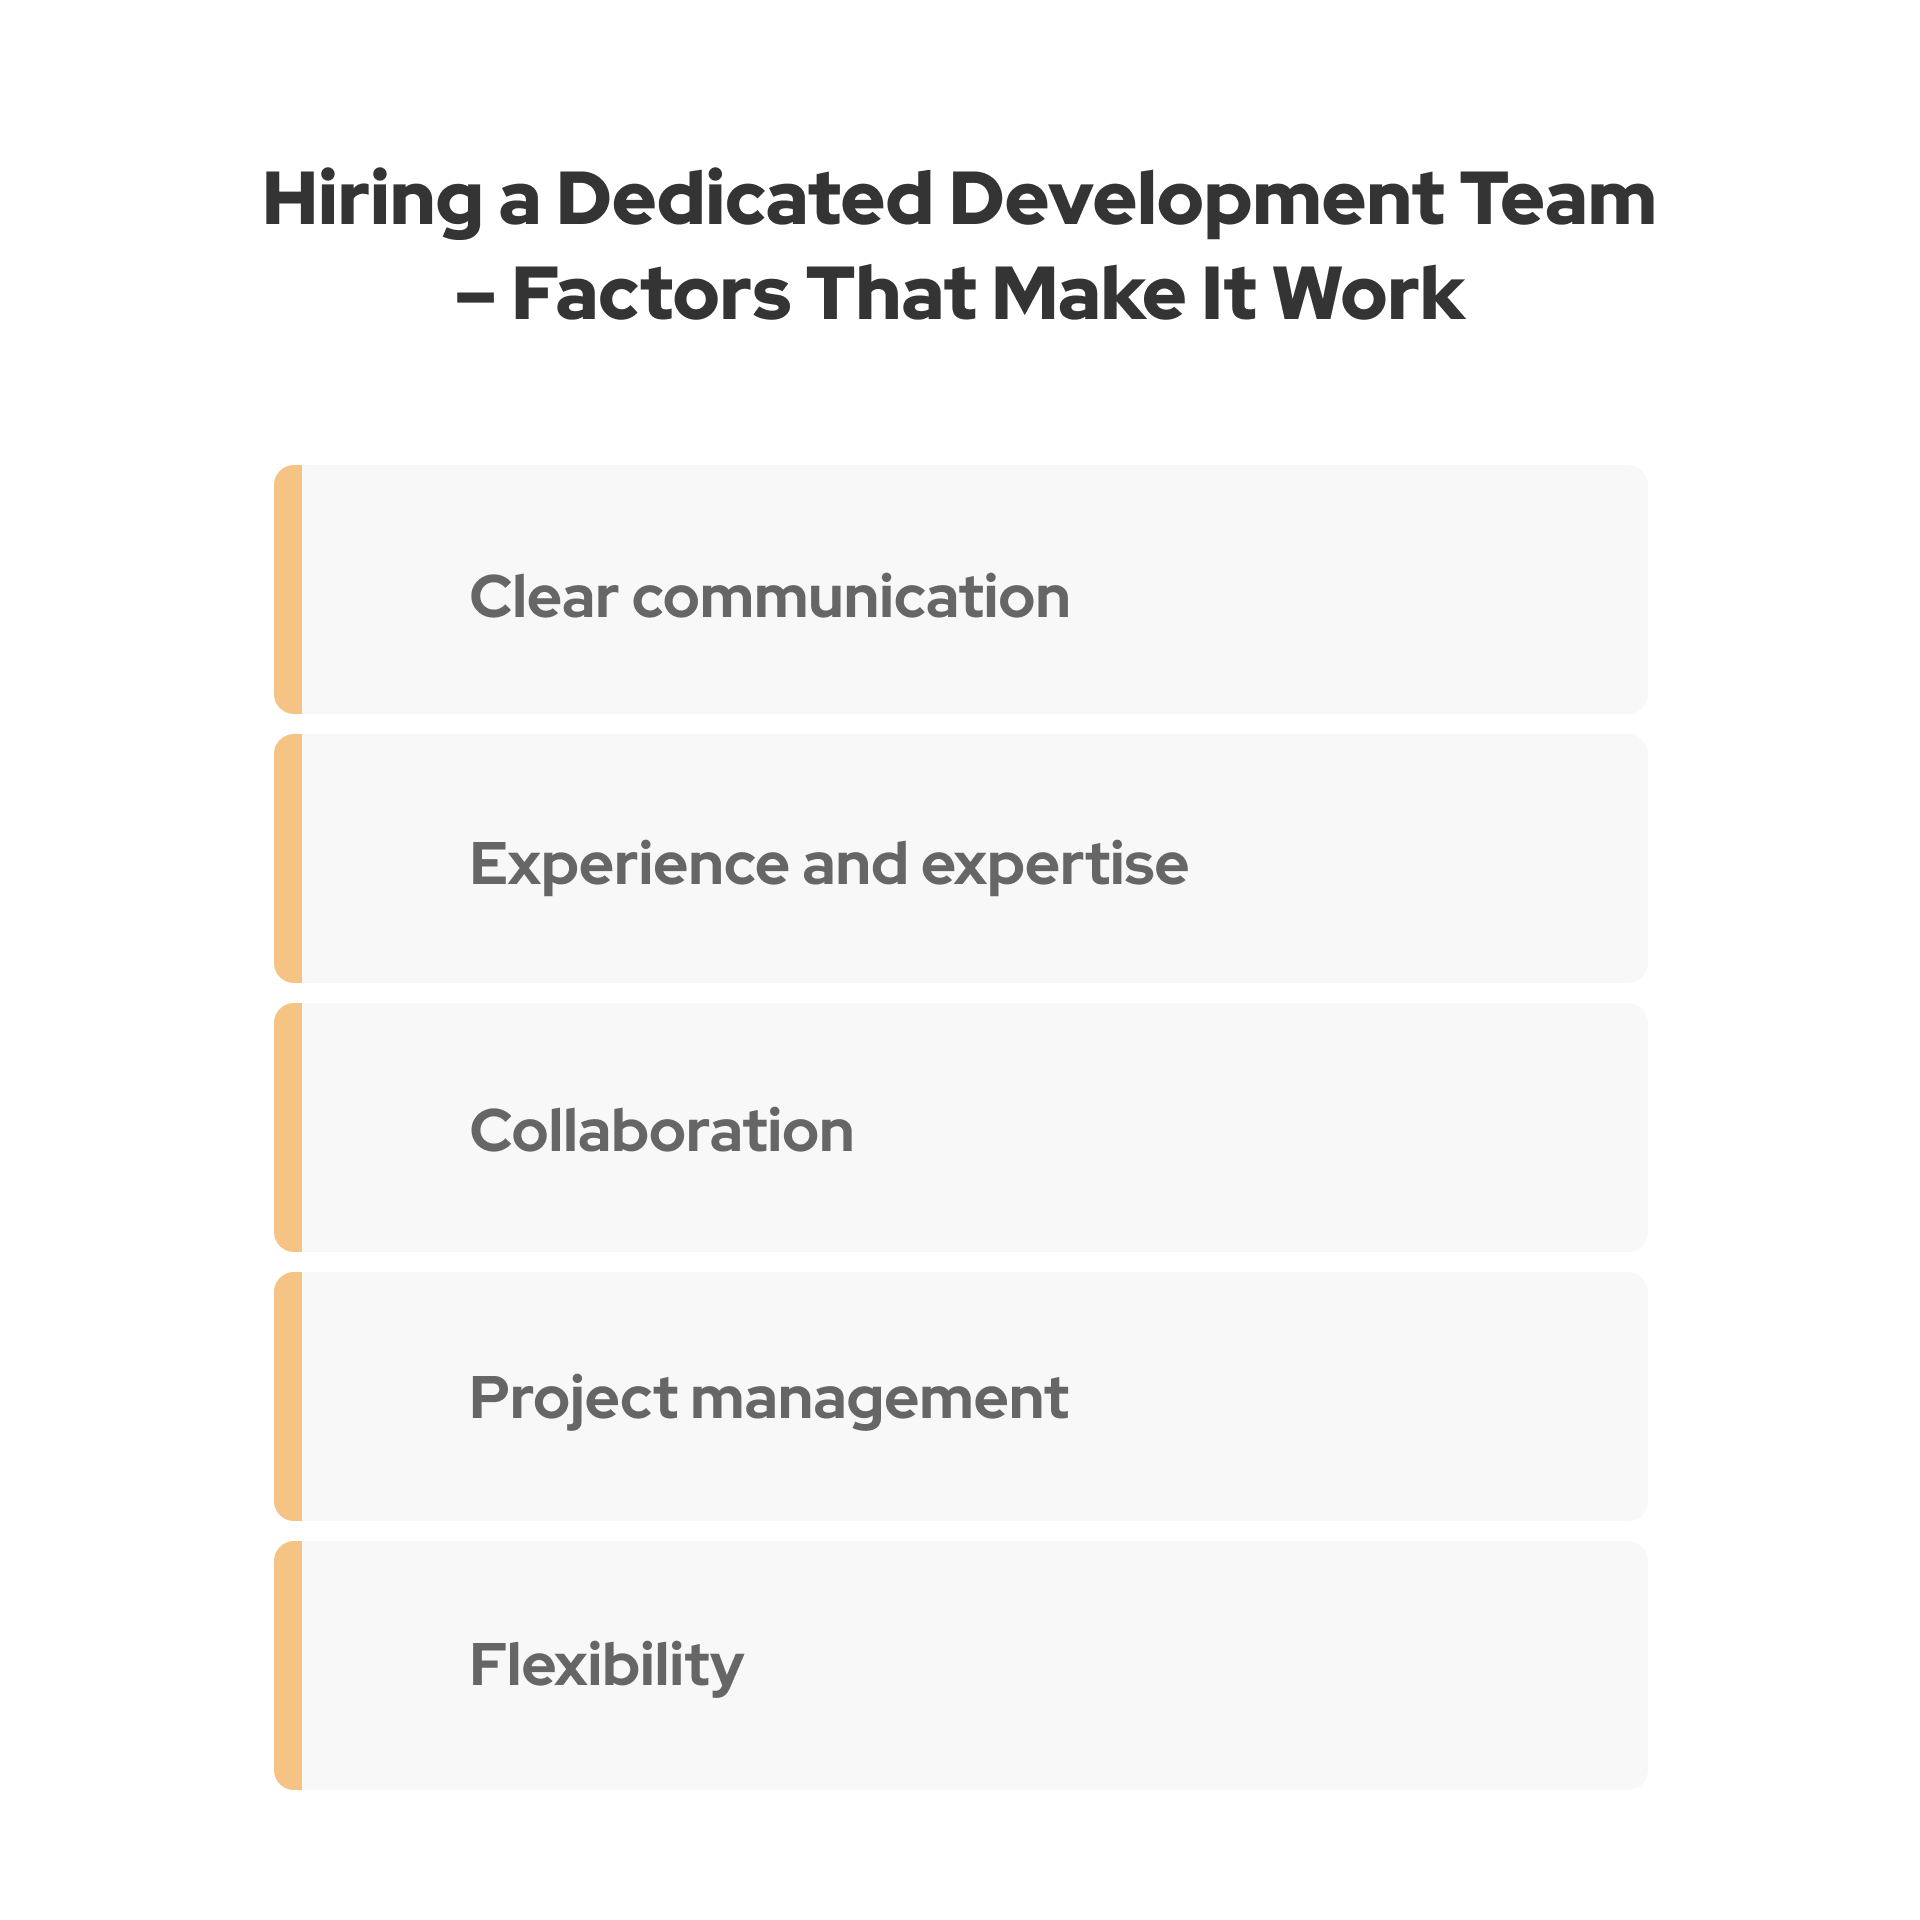 By understanding these factors, you can build and manage a dedicated software team that can deliver superior results and drives your business forward.